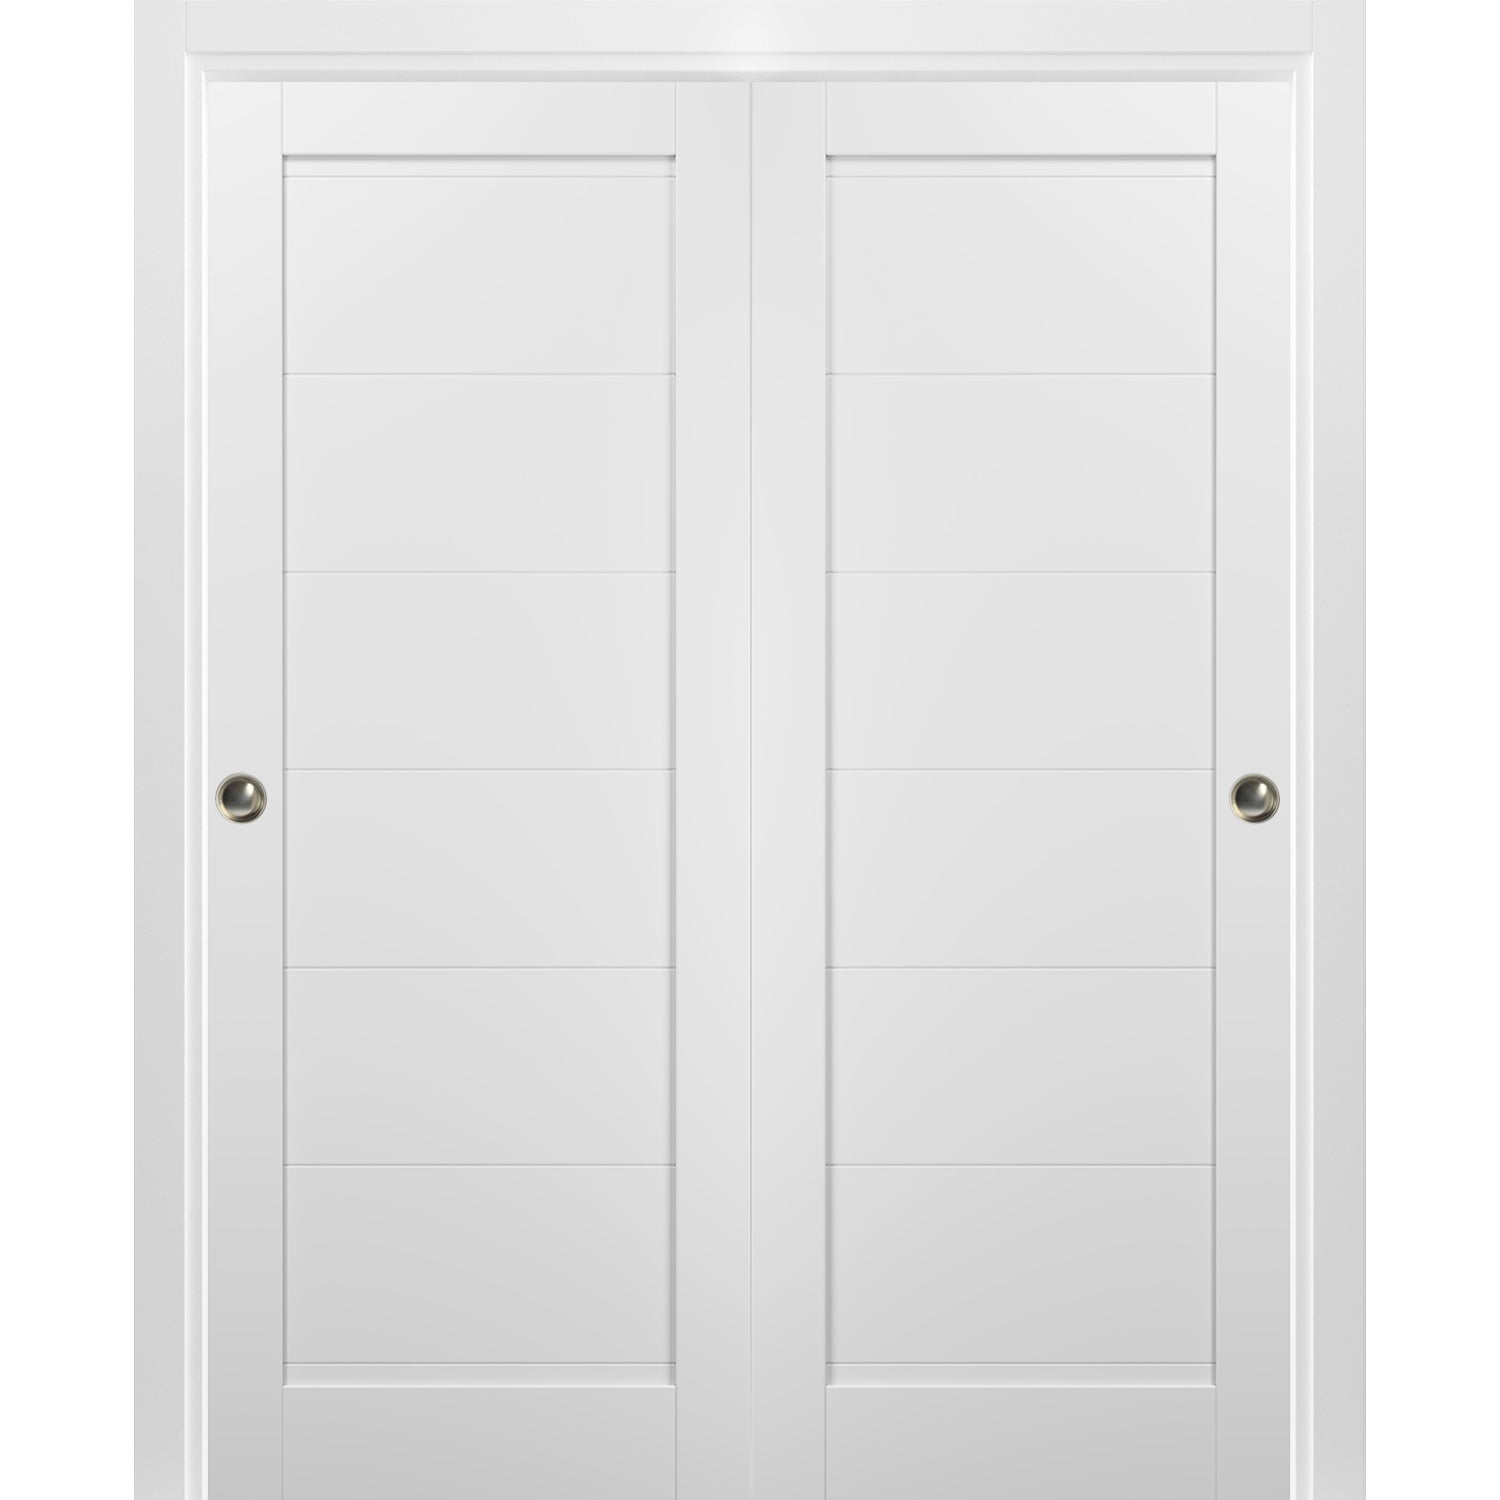 French Double Panel Lite Doors with Hardware | Quadro 4522 White Silk ...